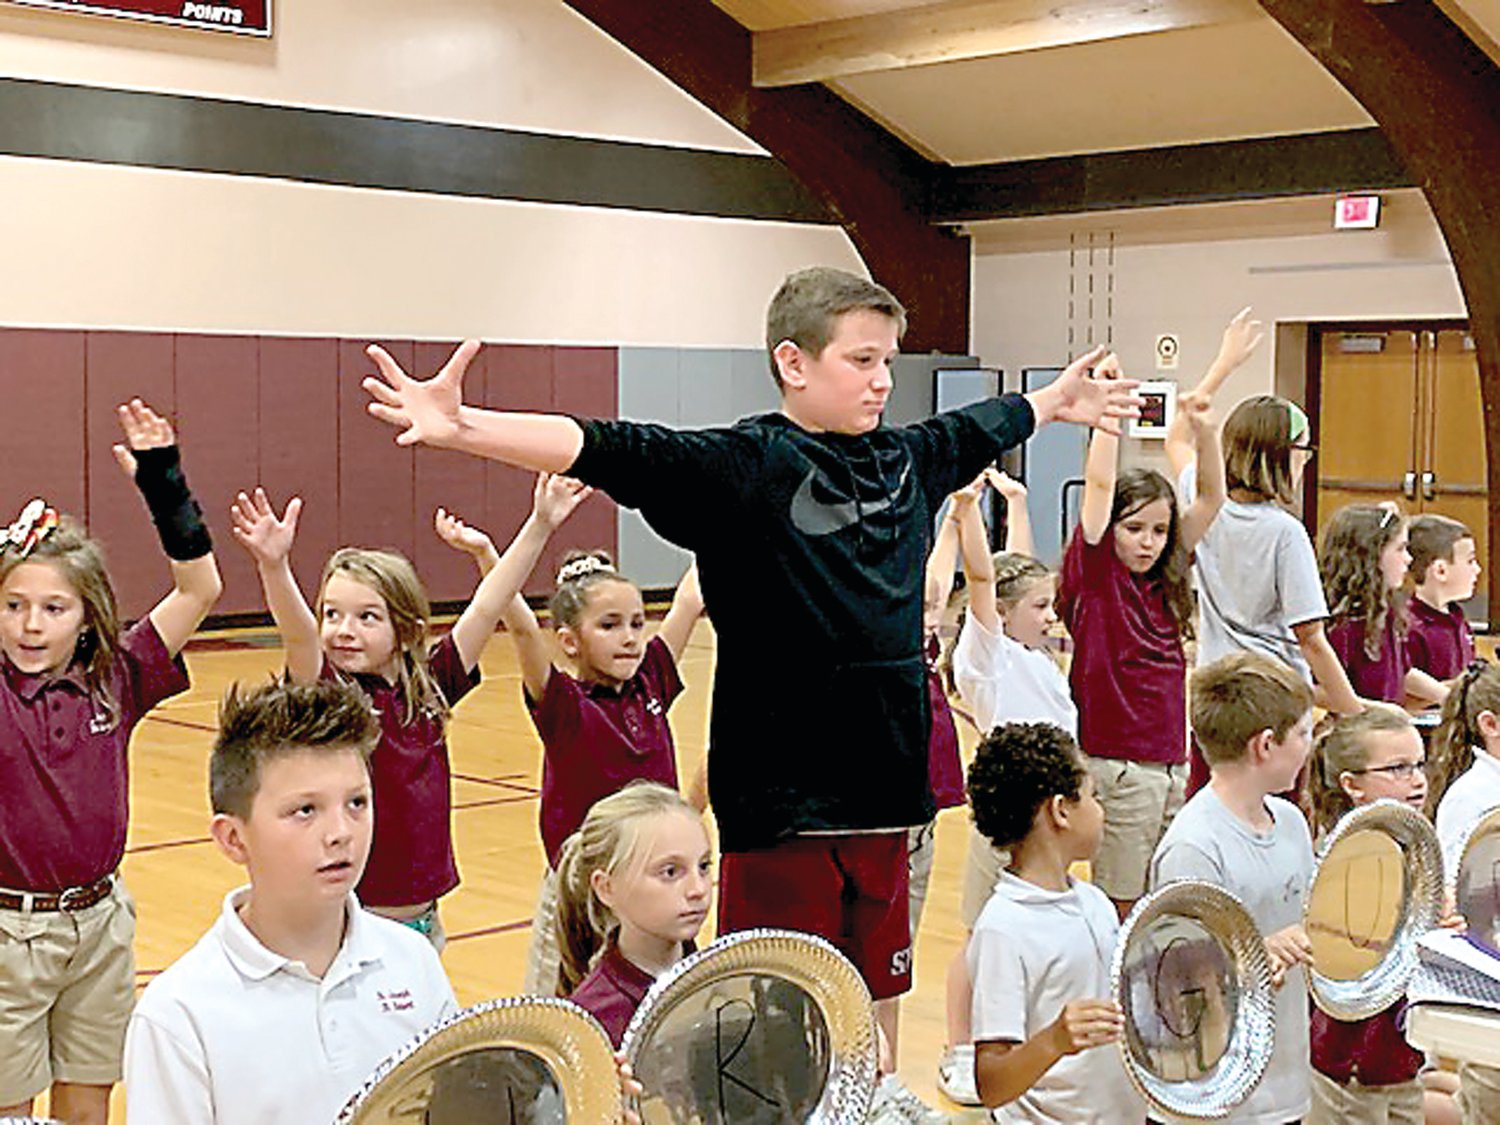 St. Joseph/St. Robert School students rehearse for the Young Performers Edition of Disney’s “Beauty and the Beast.”